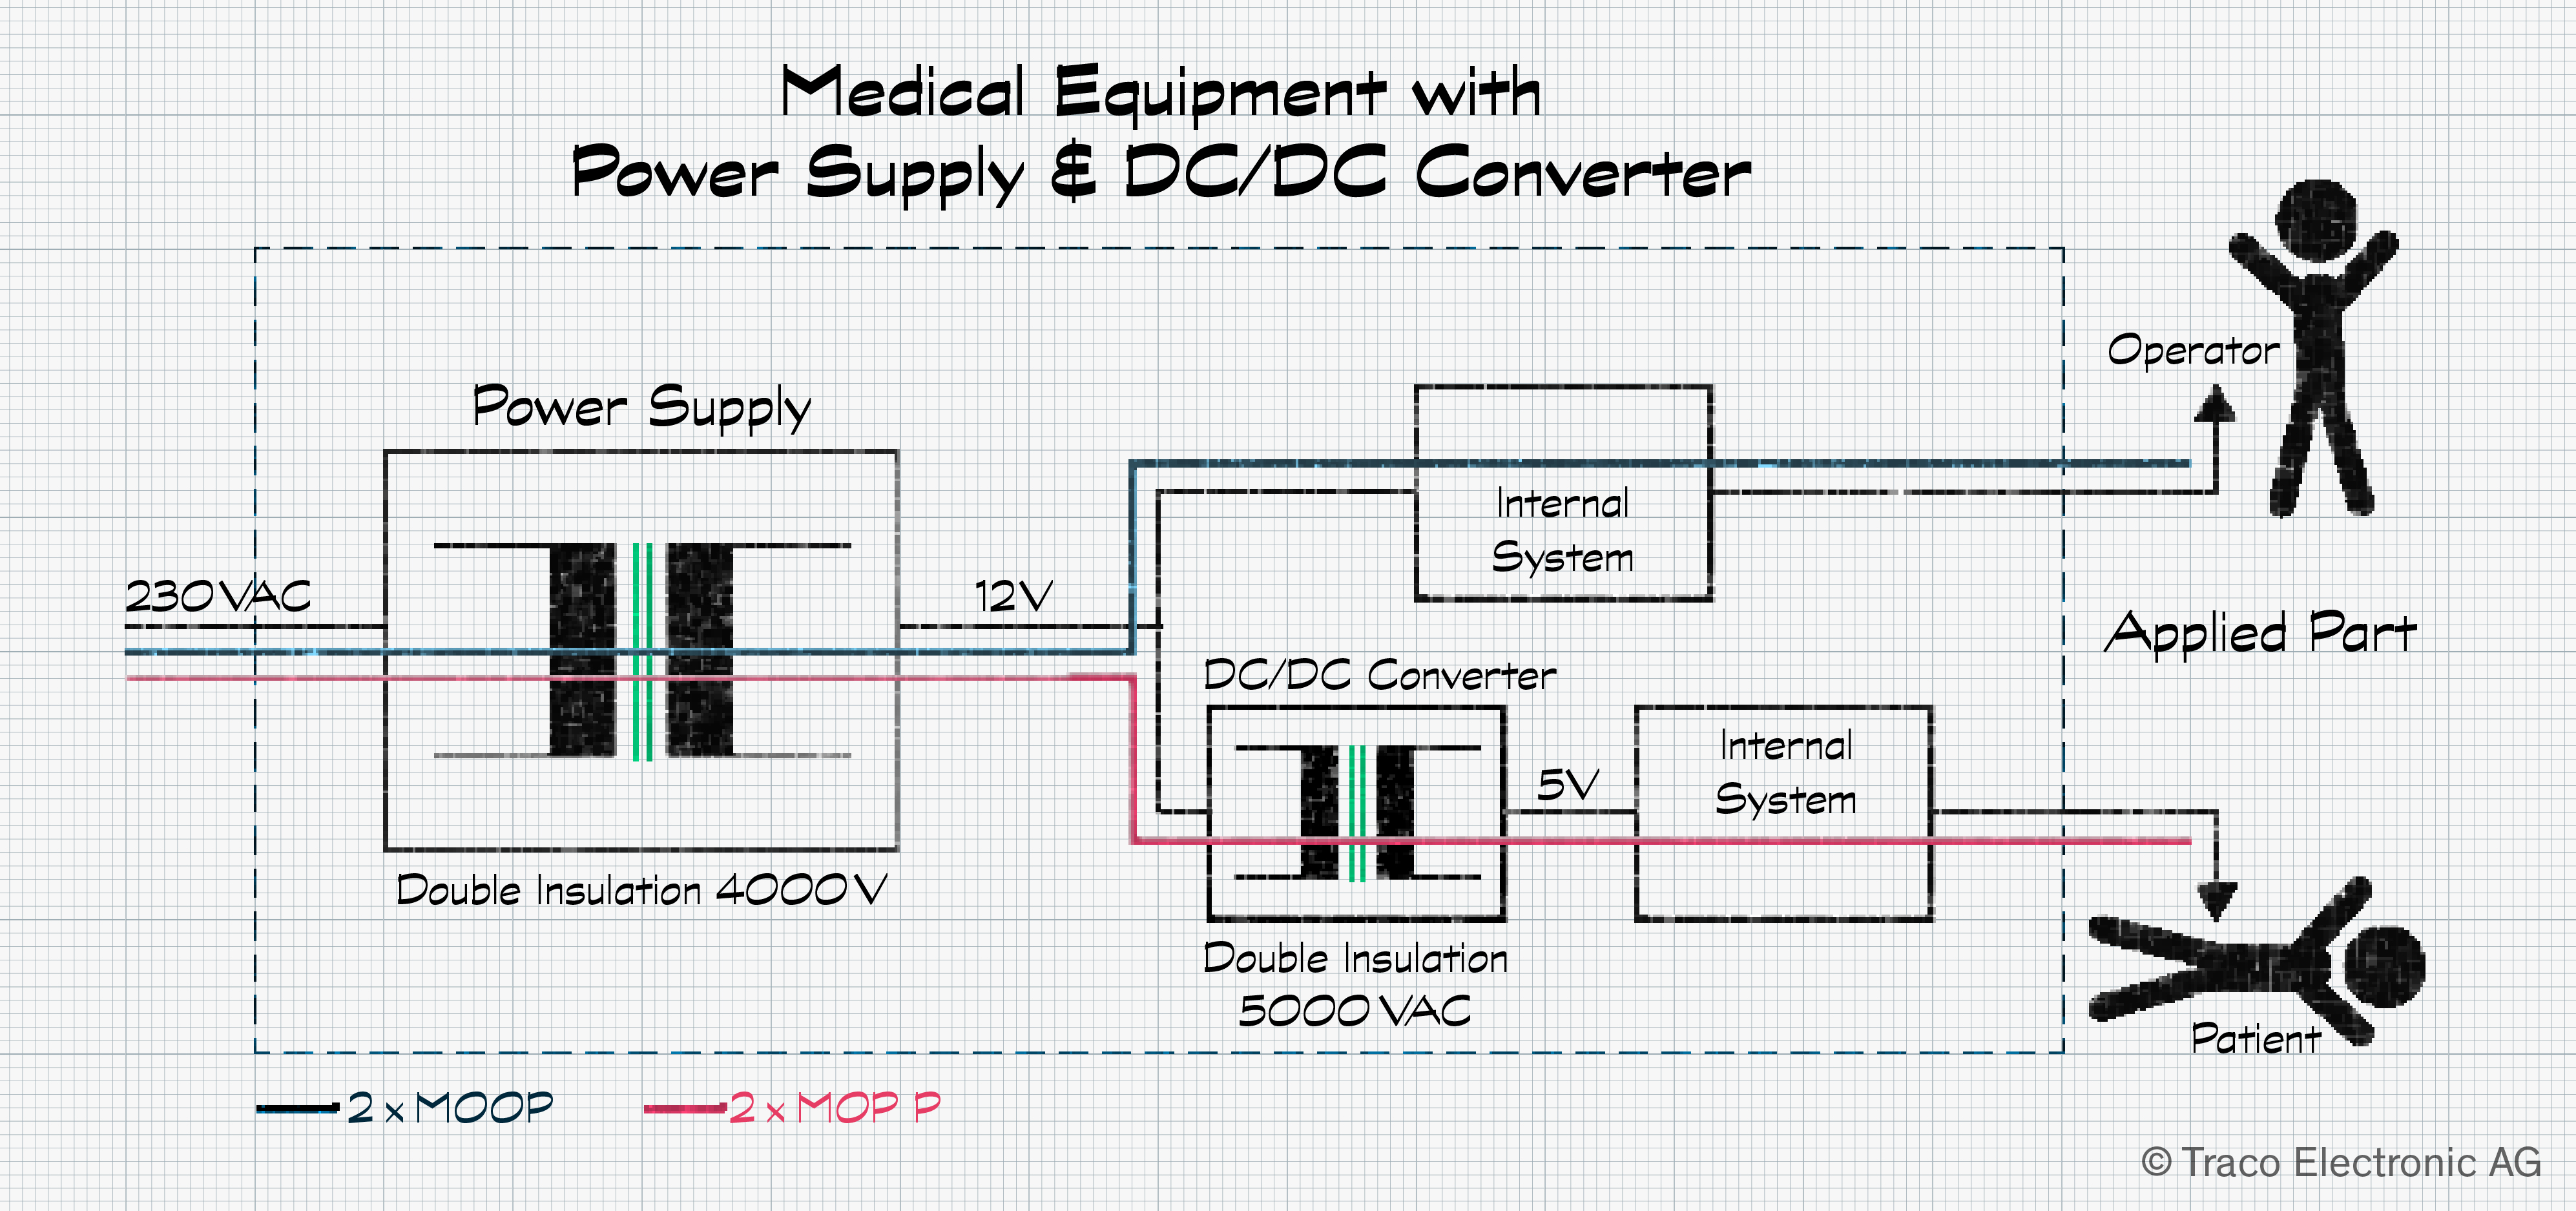 DC/DC converter - Insulated / Galvanically Isolated or non